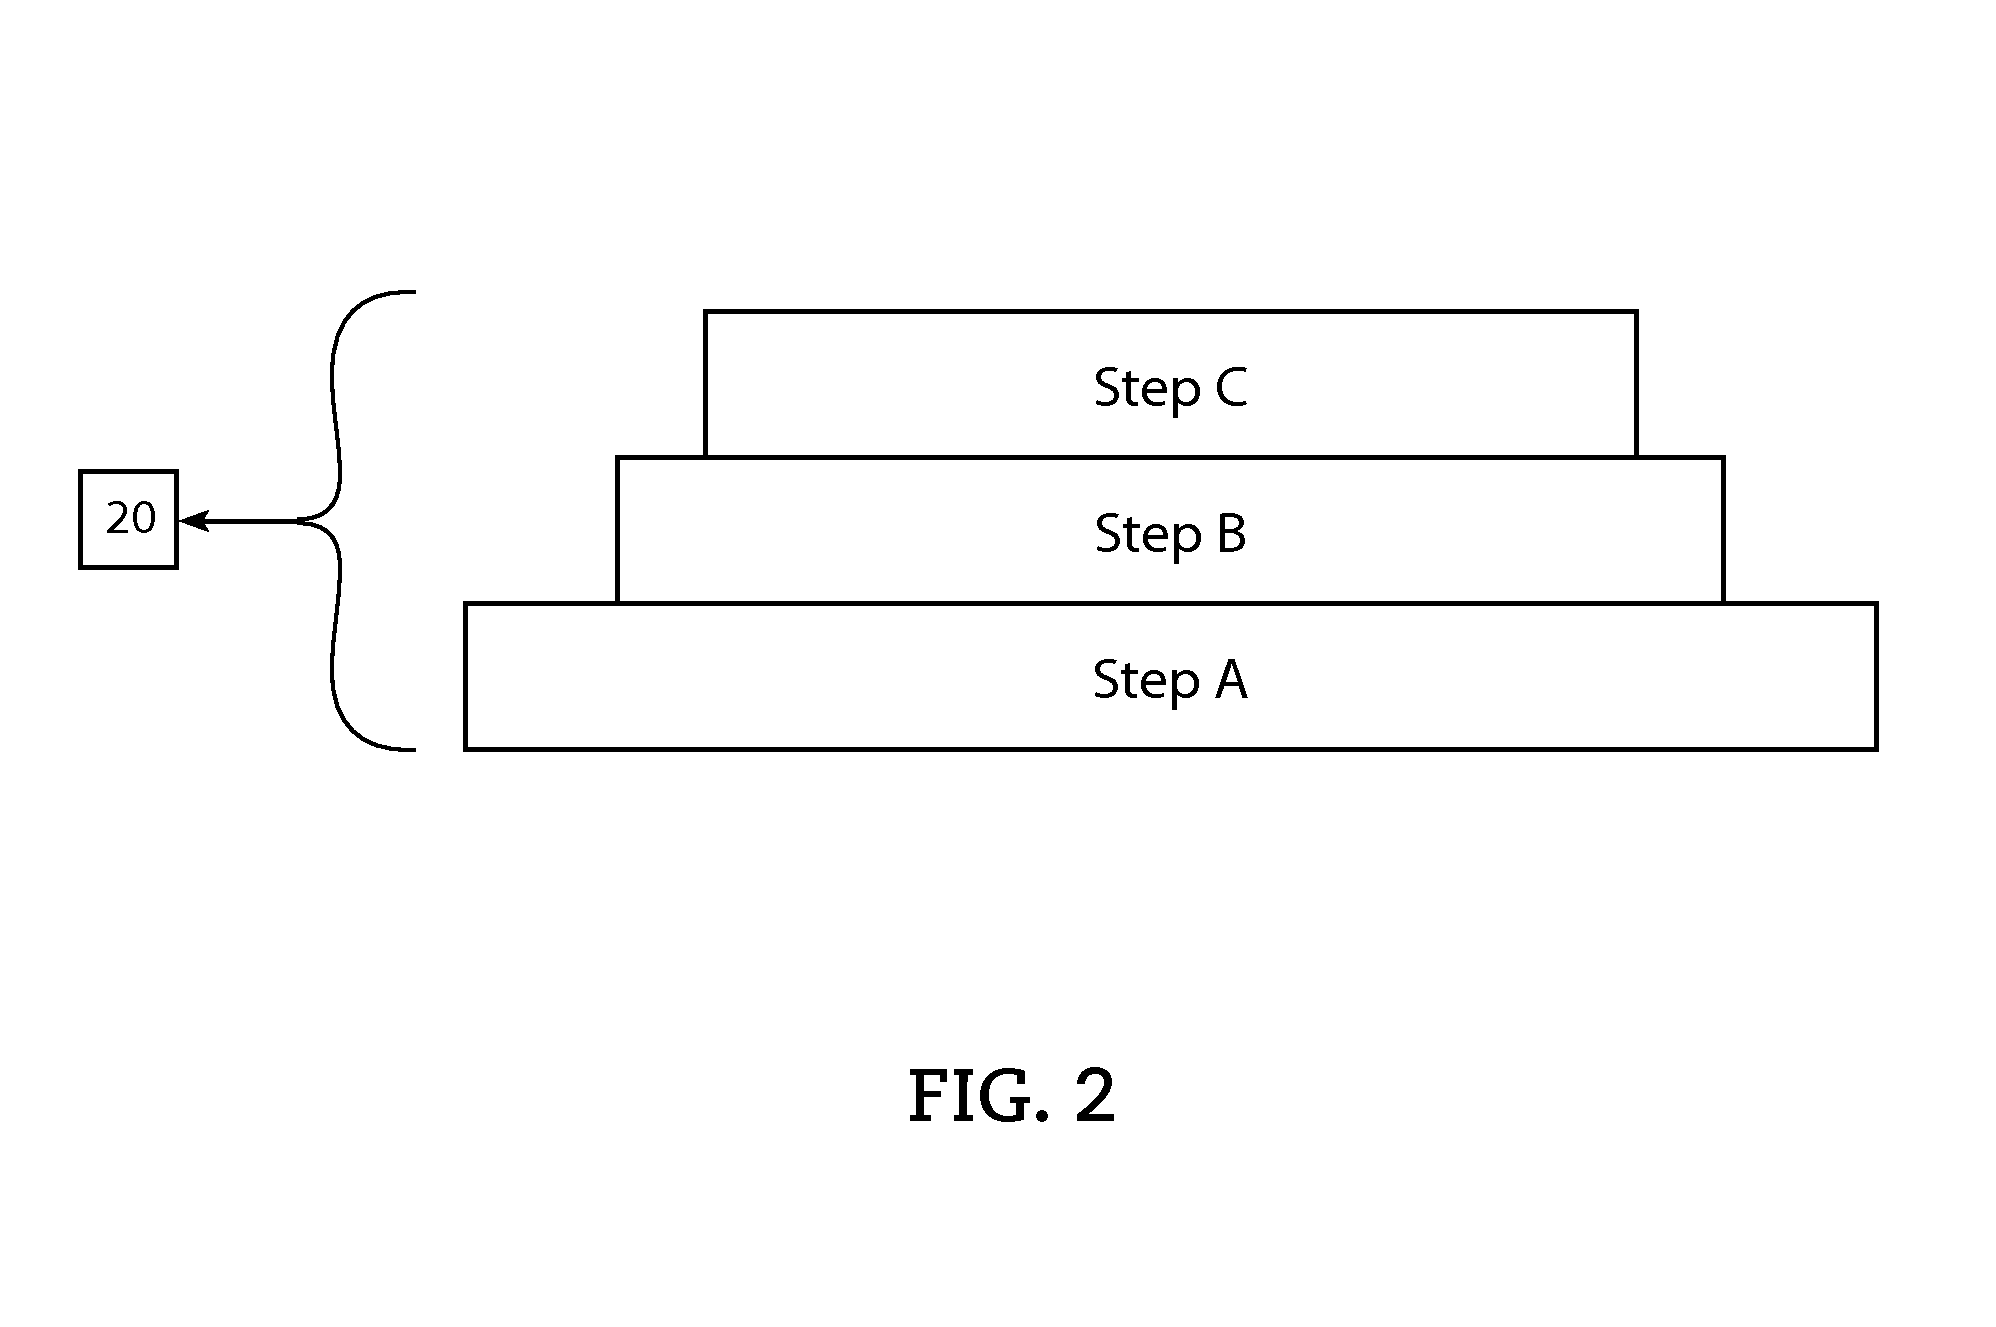 Apparatus, system and method for facilitating and securing access to transactions in a retail environment